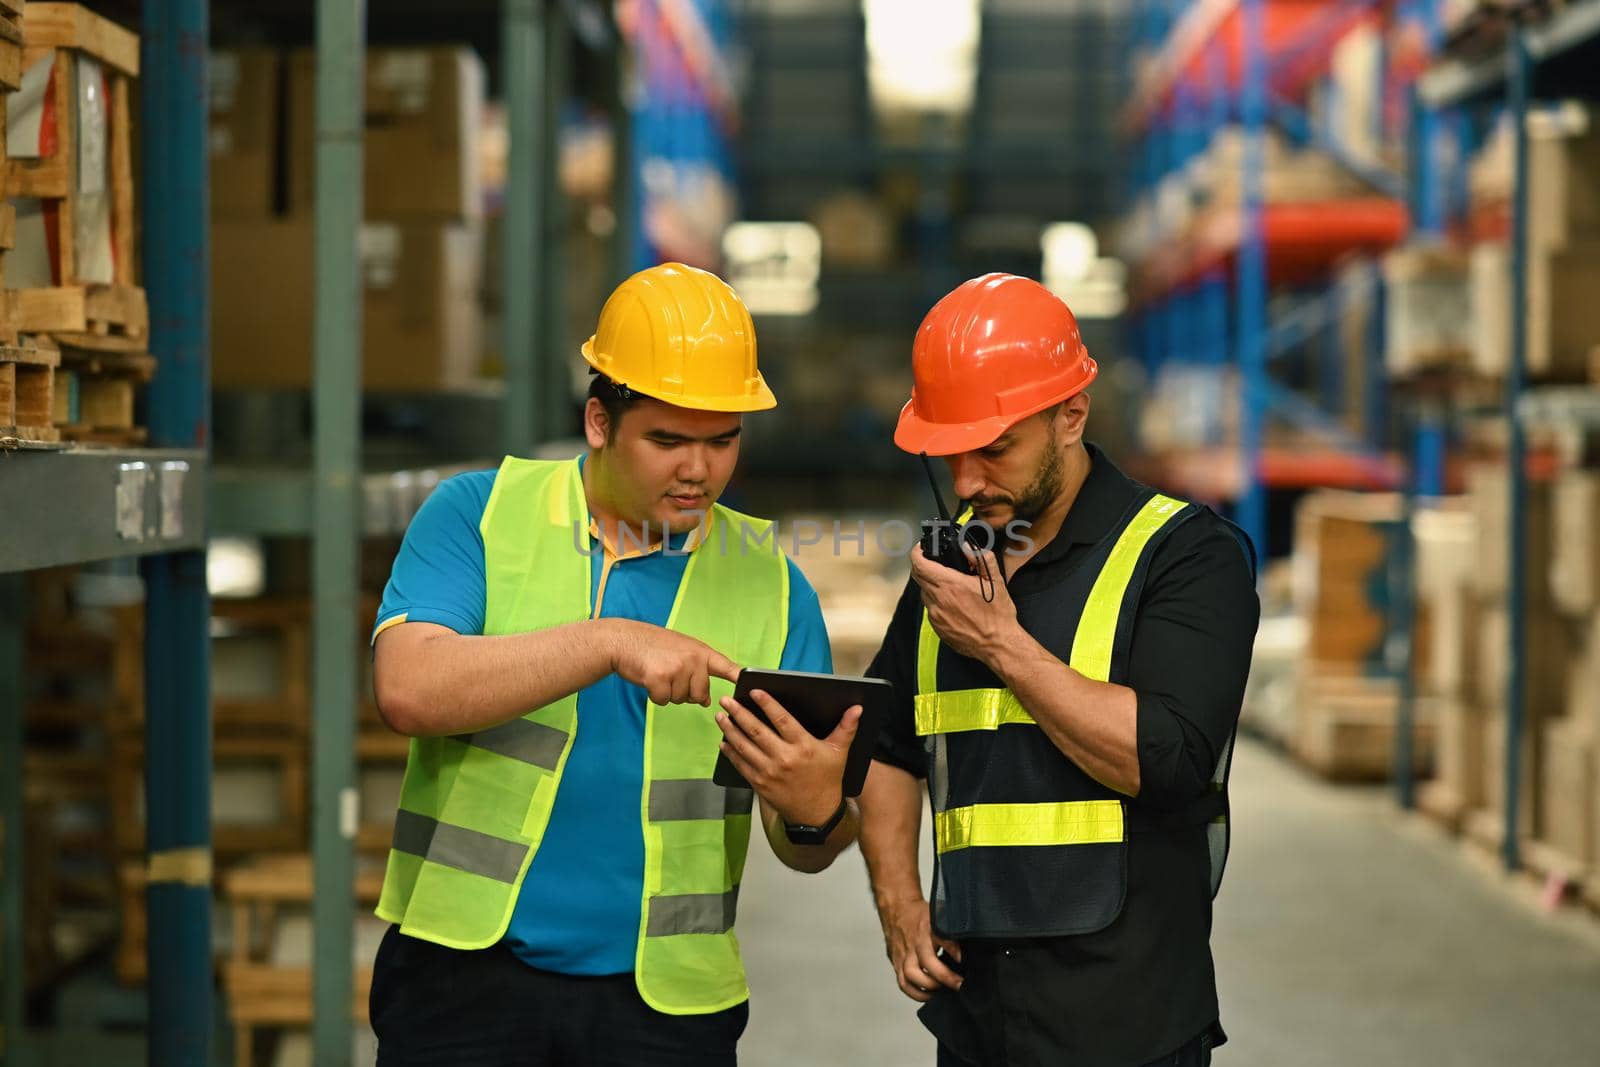 Warehouse managers and worker checking newly arrived goods on digital tablet while standing near tall shelves in large warehouse.